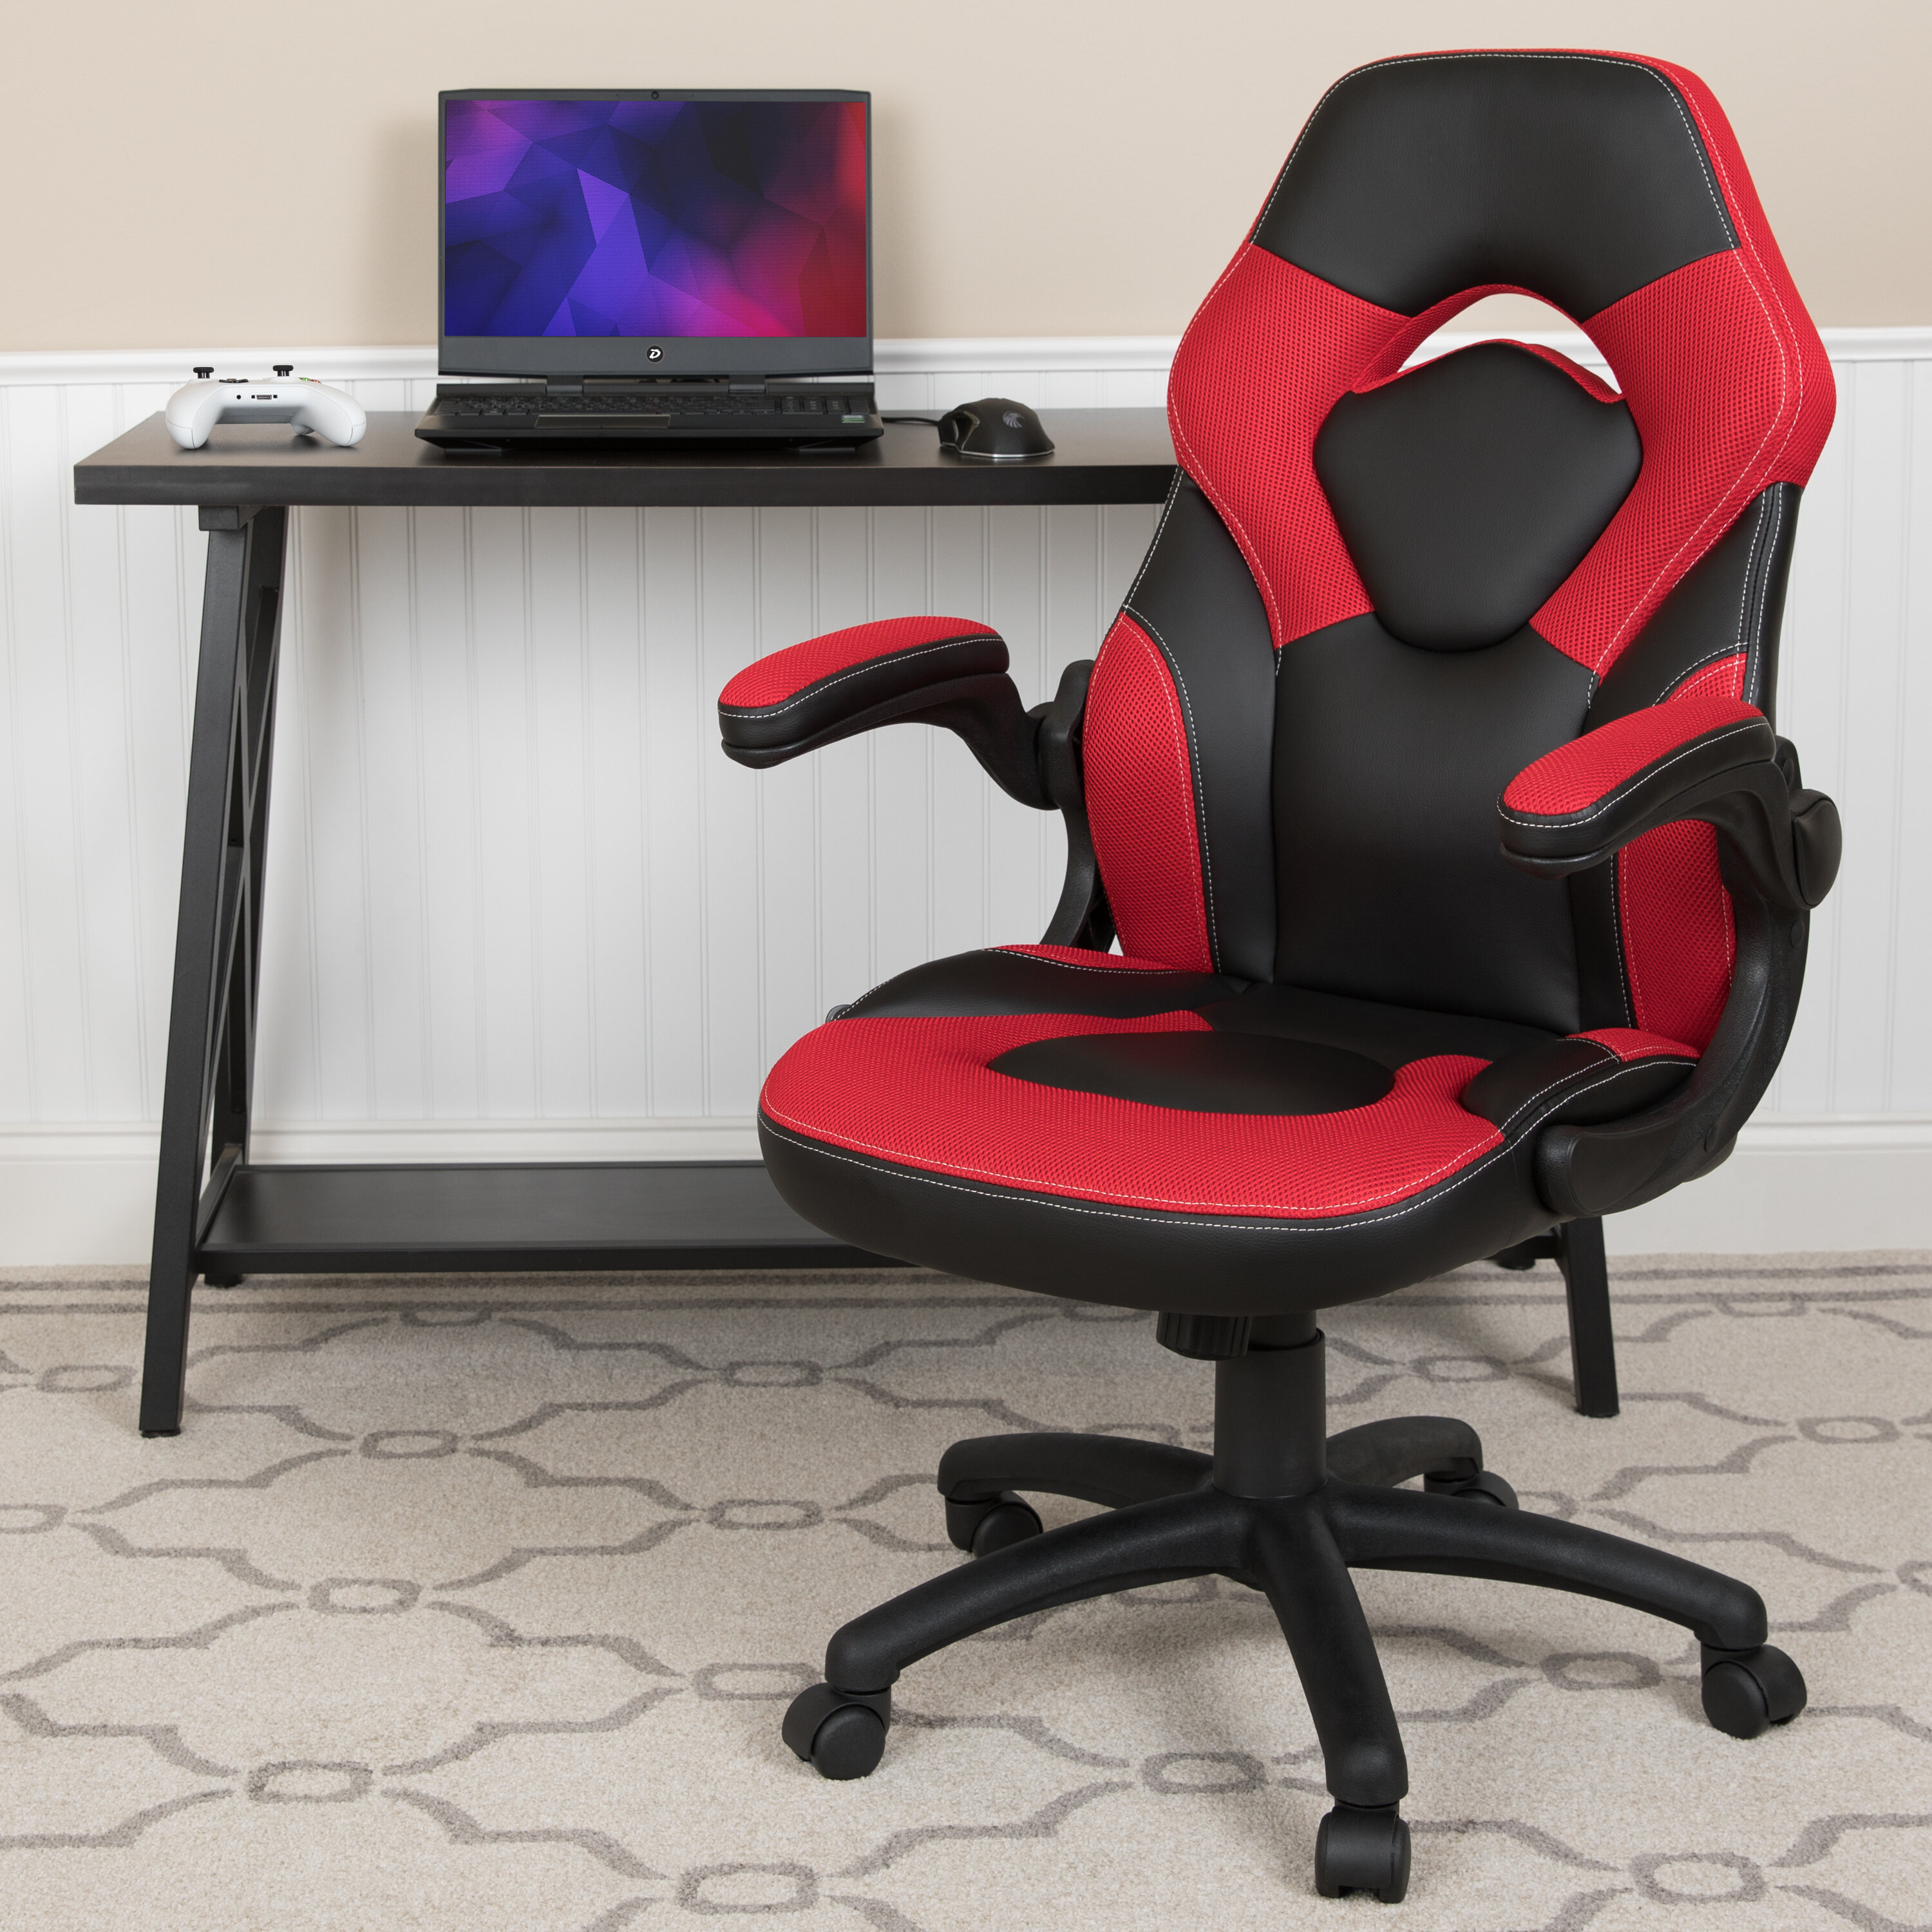 Ergonomic Gaming Chair Computer Game Chair Swivel with Adjustable Height and Lumbar Support Black Red